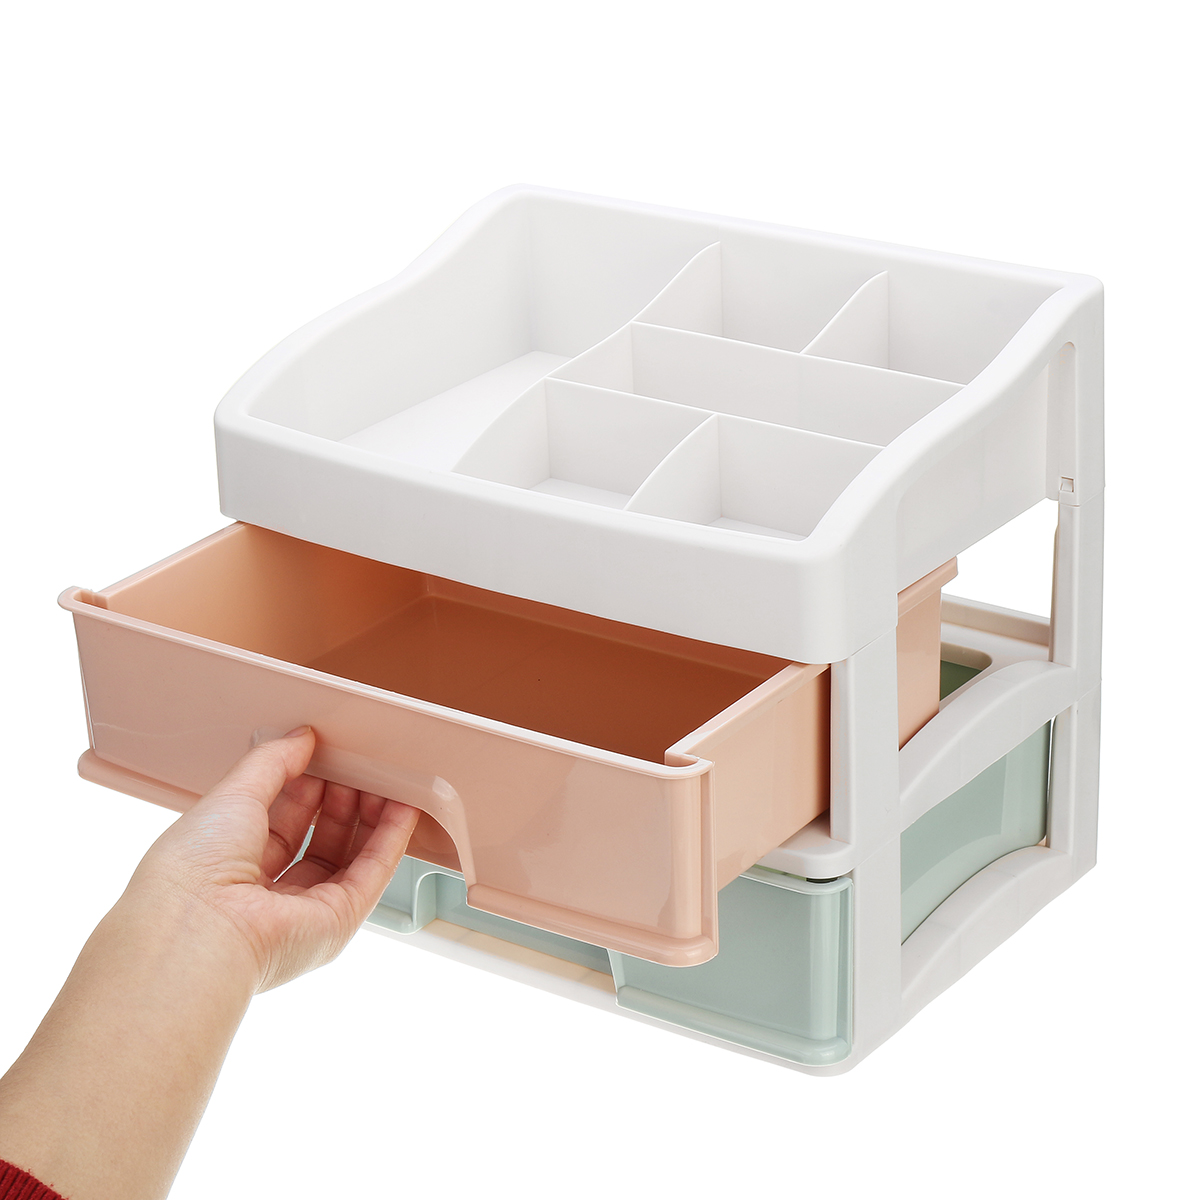 Plastic-Makeup-Holder-Box-Storage-Desktop-Container-Cosmetic--Jewelry-Container-Table-Organizer-1563970-7